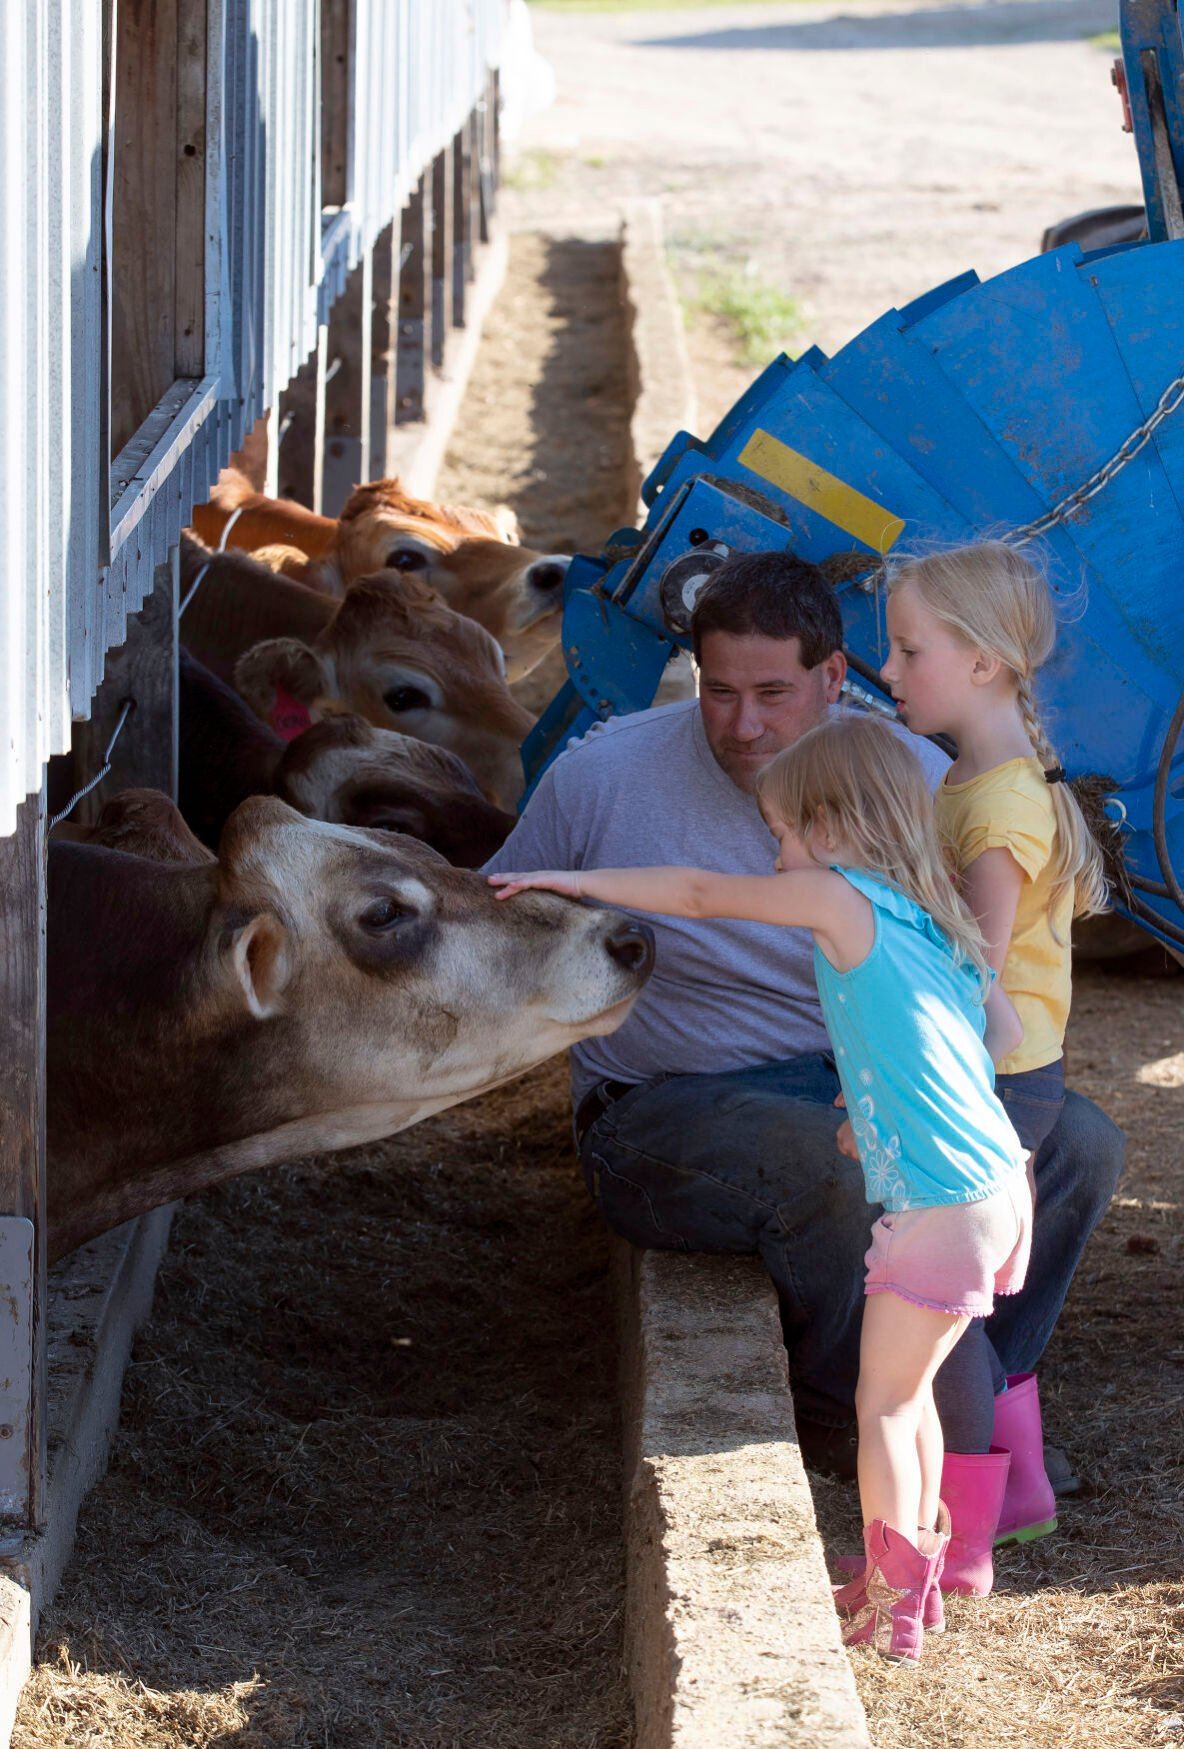 Chad, Kinsey, 6, and Layne Gleason, 4 pet some cattle on their rural Shullsburg, Wis., farm on Tuesday, August 16, 2022.    PHOTO CREDIT: Stephen Gassman